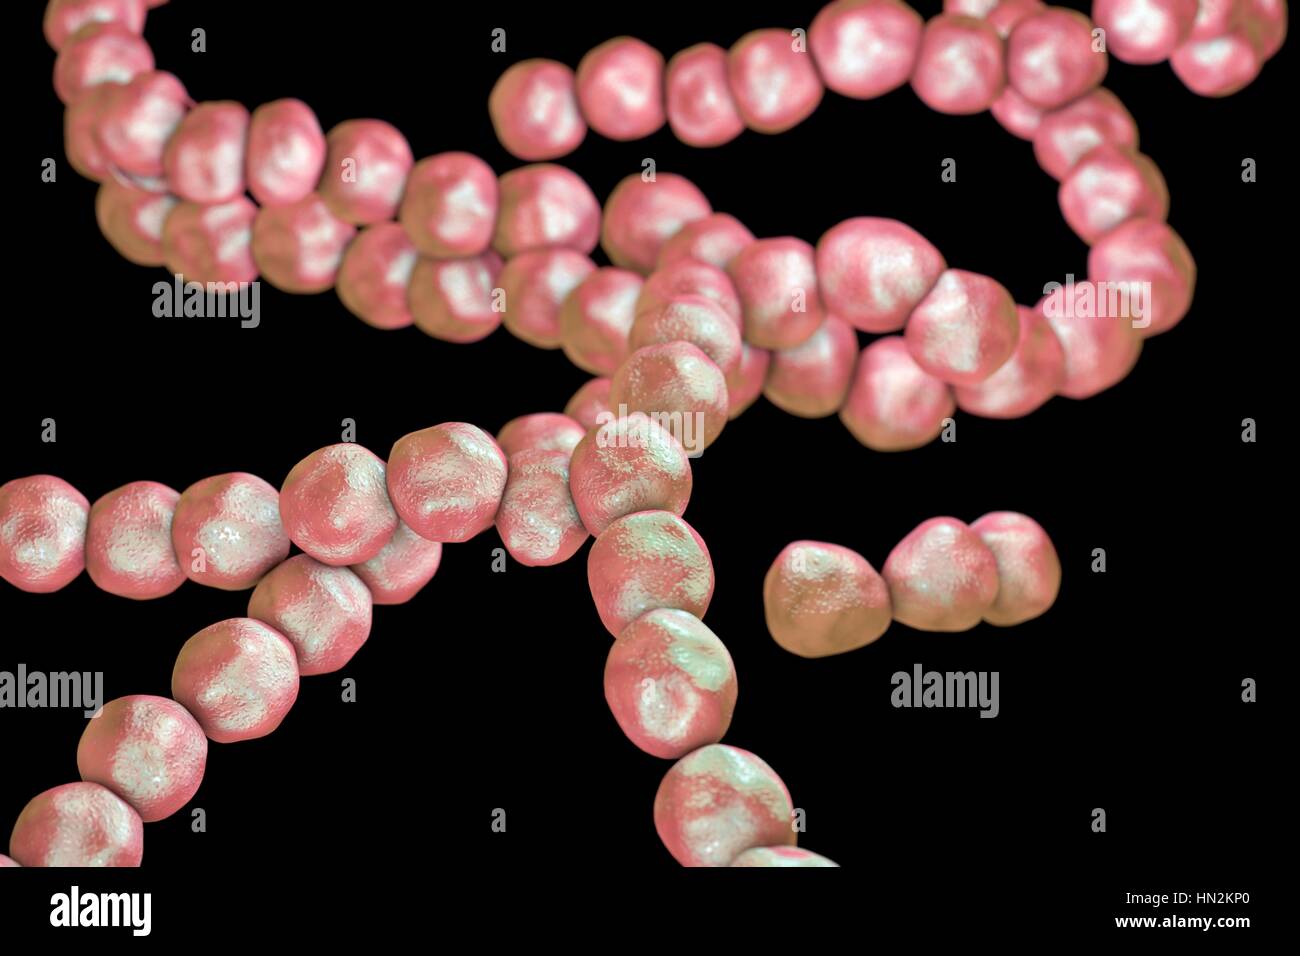 Streptococcus bacteria, computer illustration. Streptococcus bacteria are an example of cocci (round bacteria) that form chains. There are over 50 species of Streptococcus bacteria, some of which cause disease in humans. Stock Photo